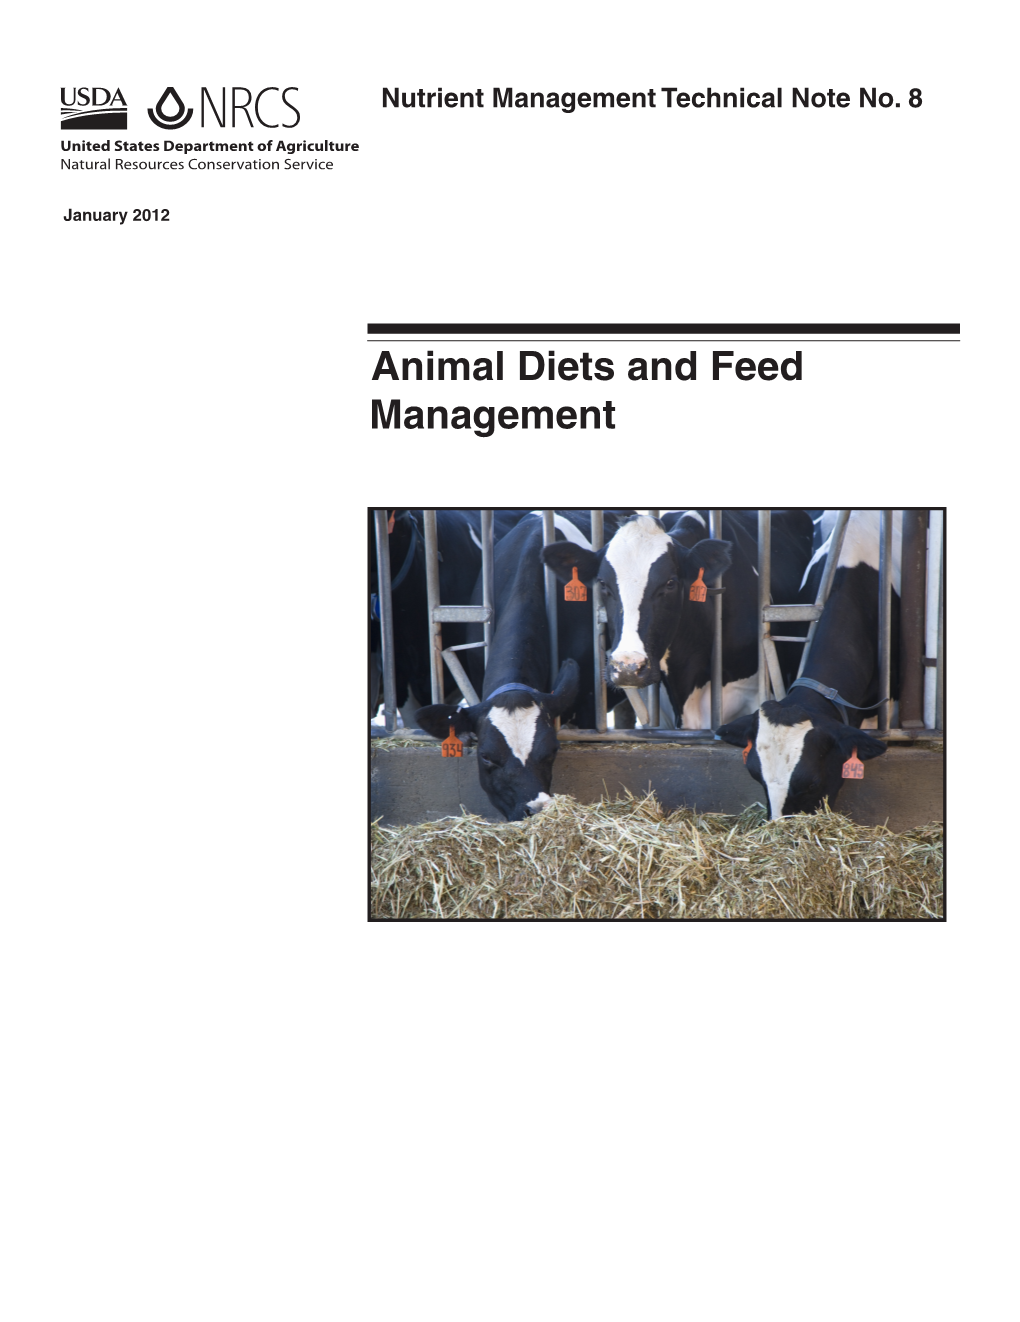 Animal Diets and Feed Management January 2012